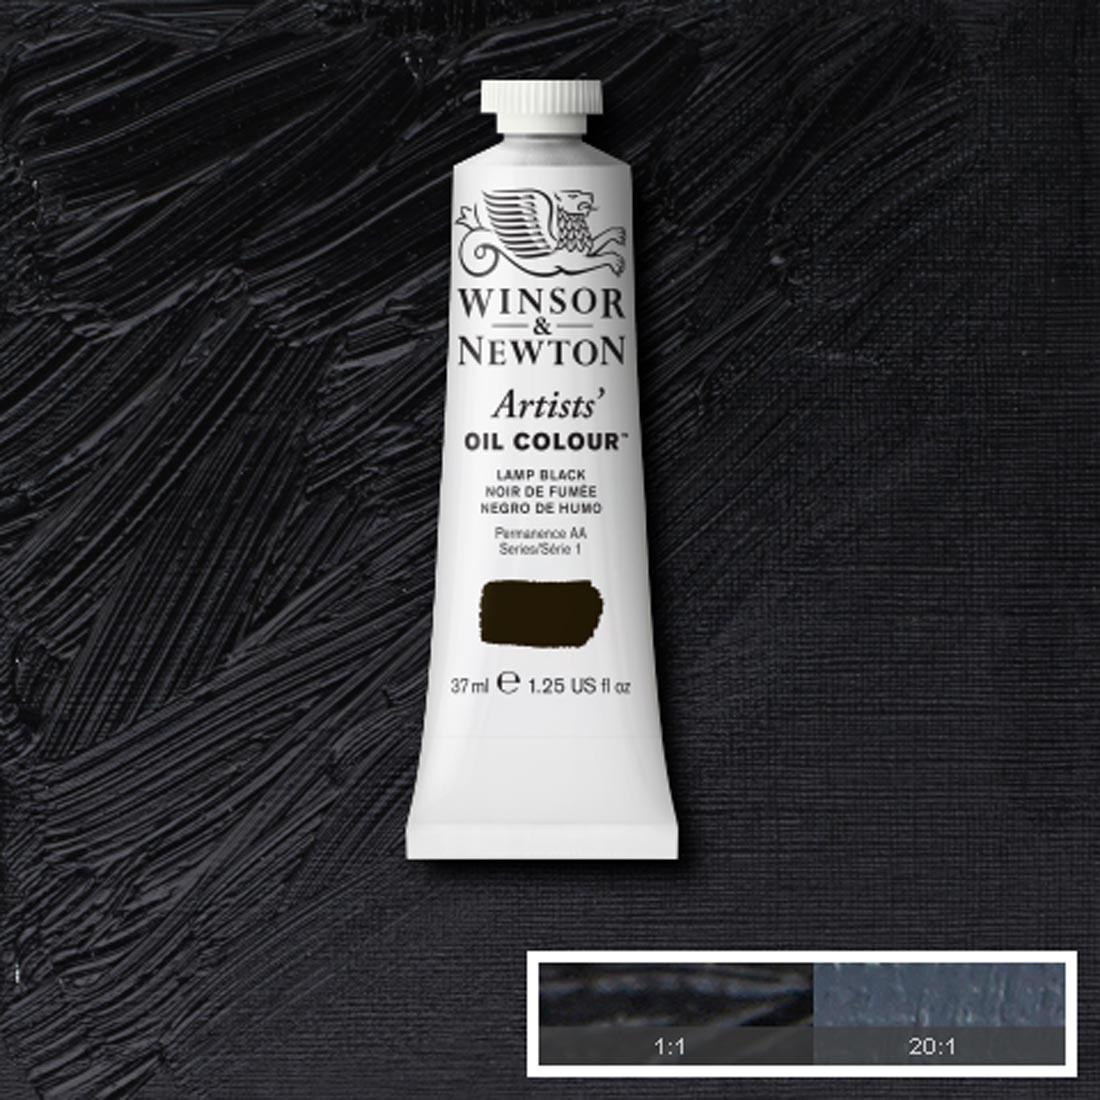 Tube of Lamp Black Winsor & Newton Artists' Oil Colour with a paint swatch for the background